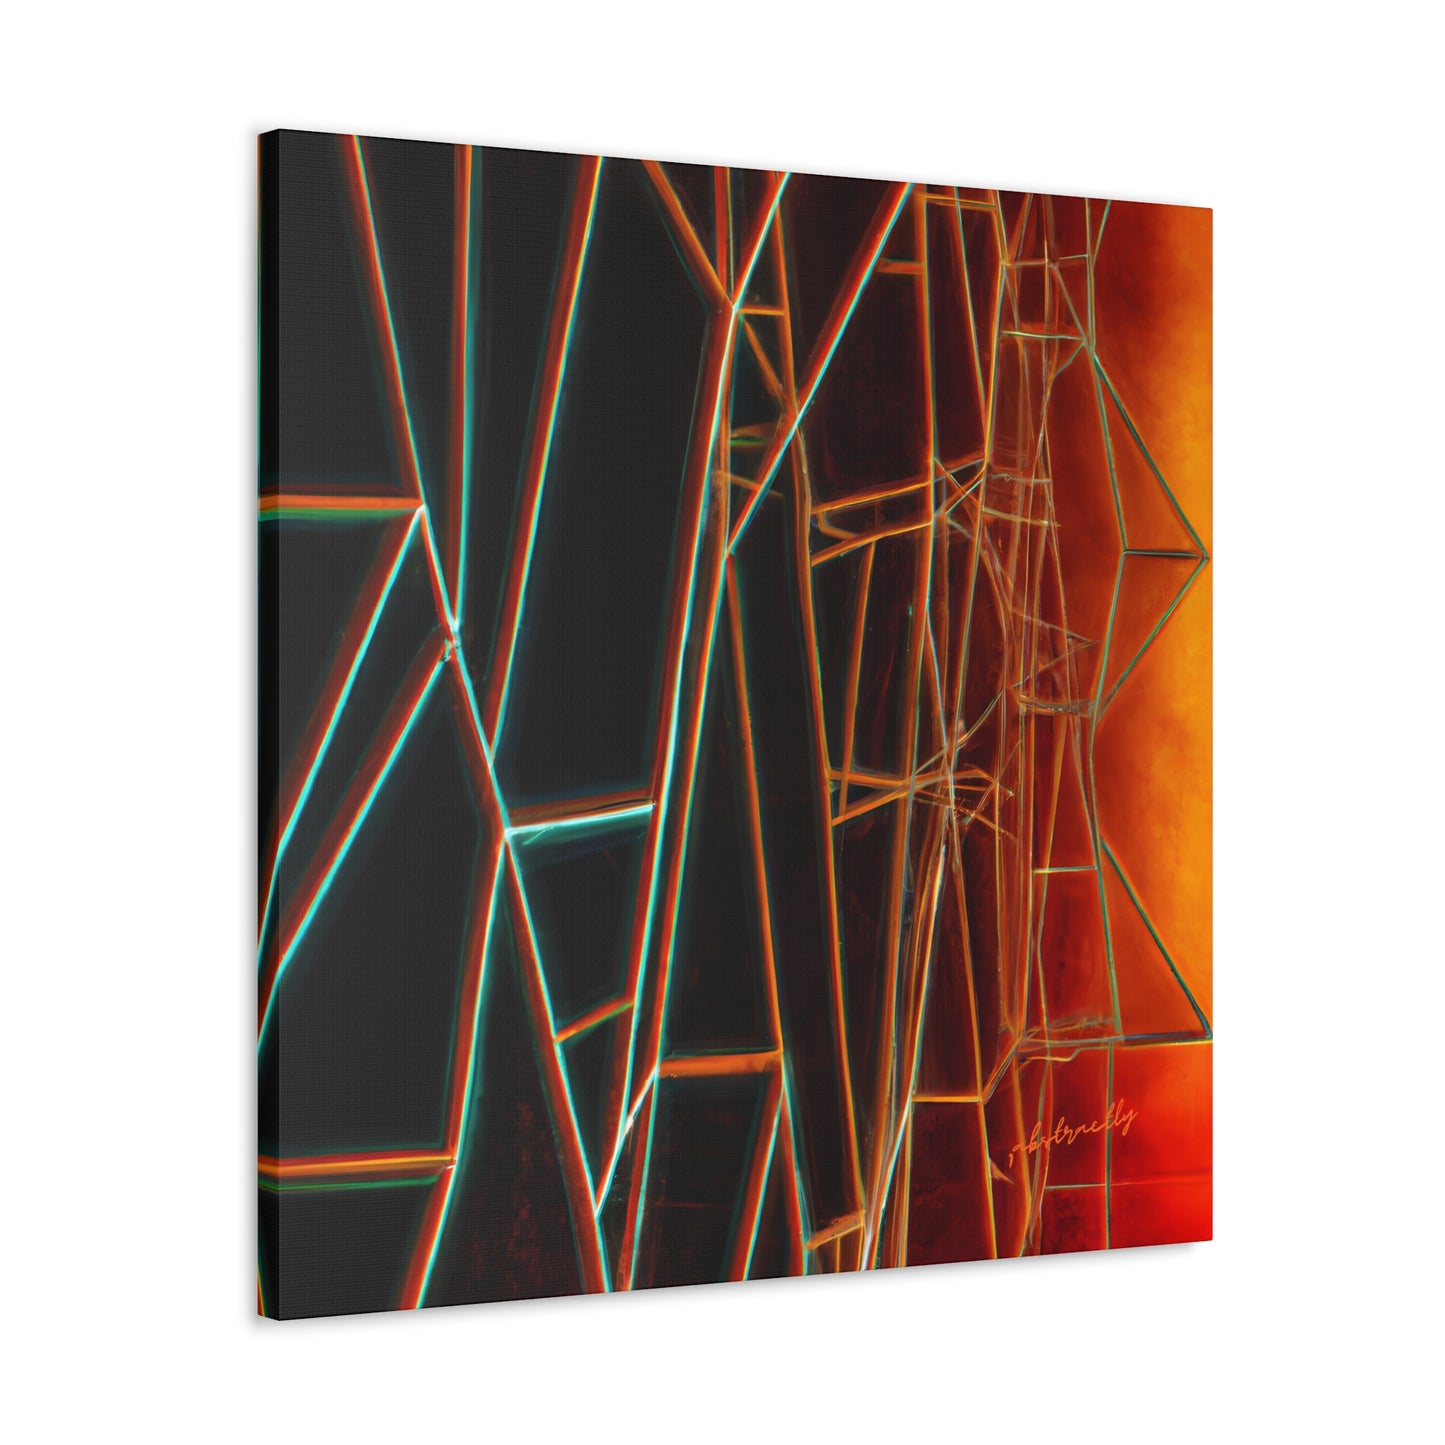 Alec Richardson - Tension Force, Abstractly - Canvas